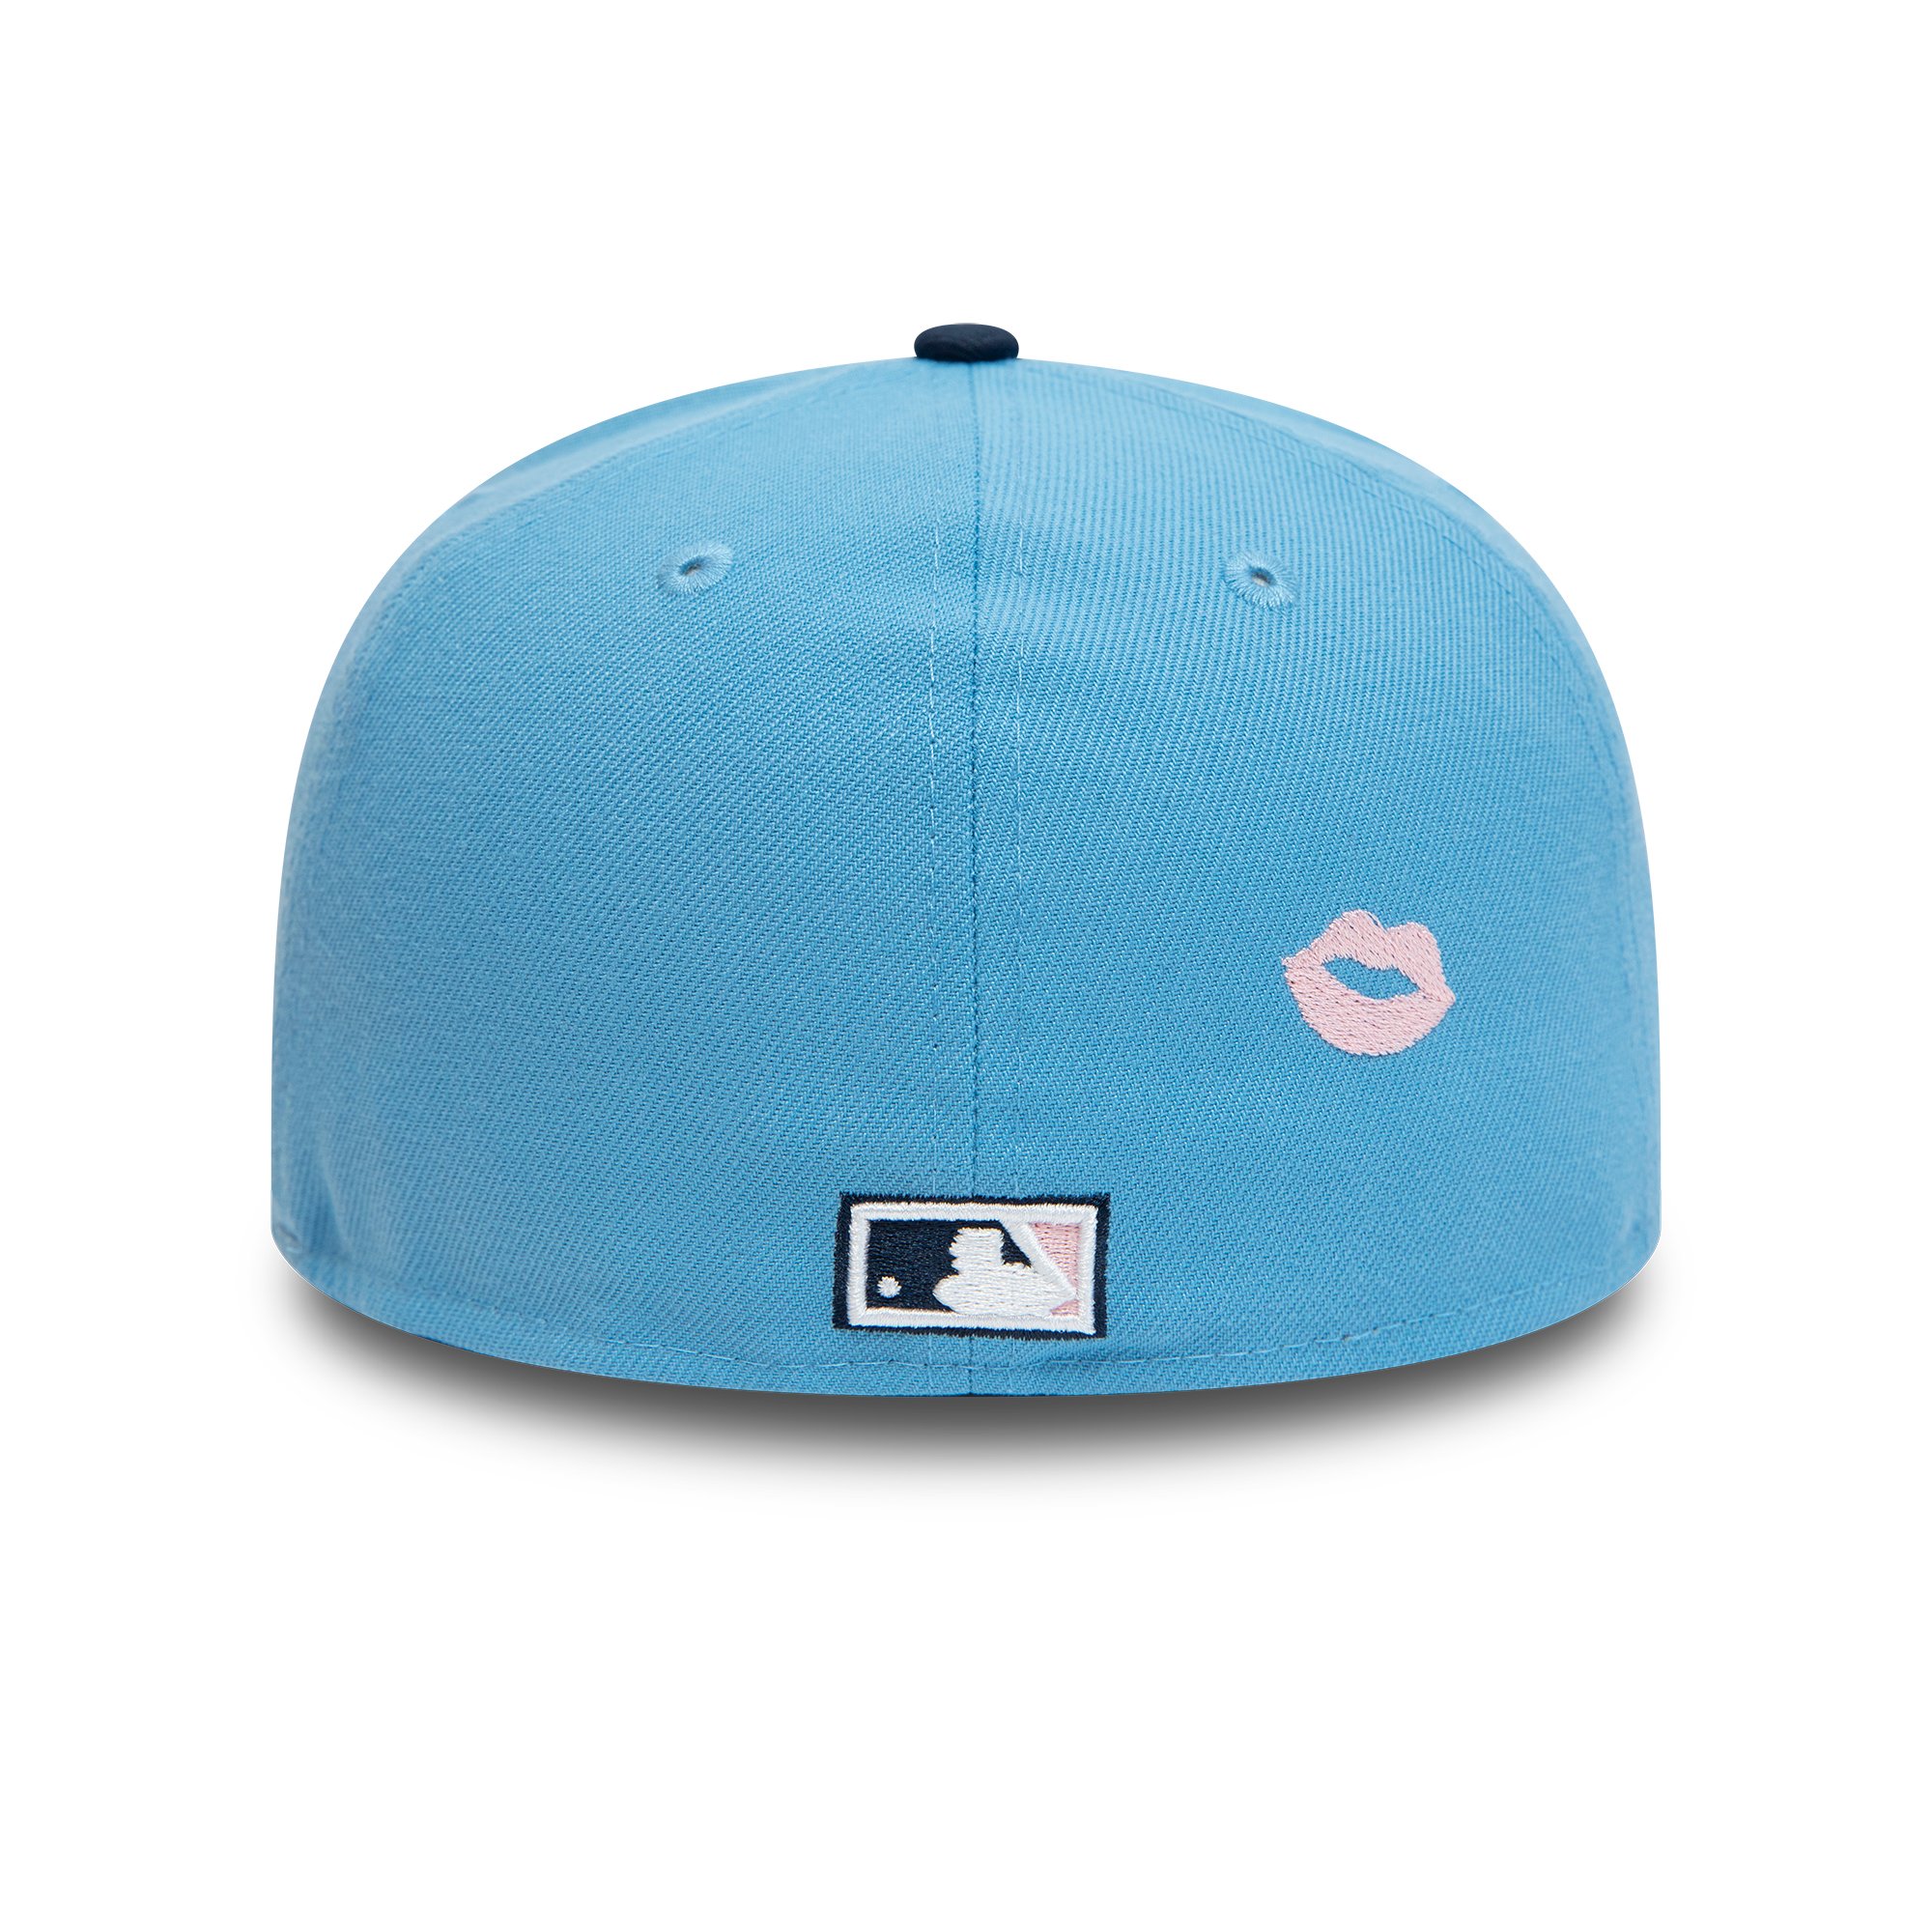 Atlanta Braves 40th Anniversary Sky Blue 59FIFTY Fitted Cap